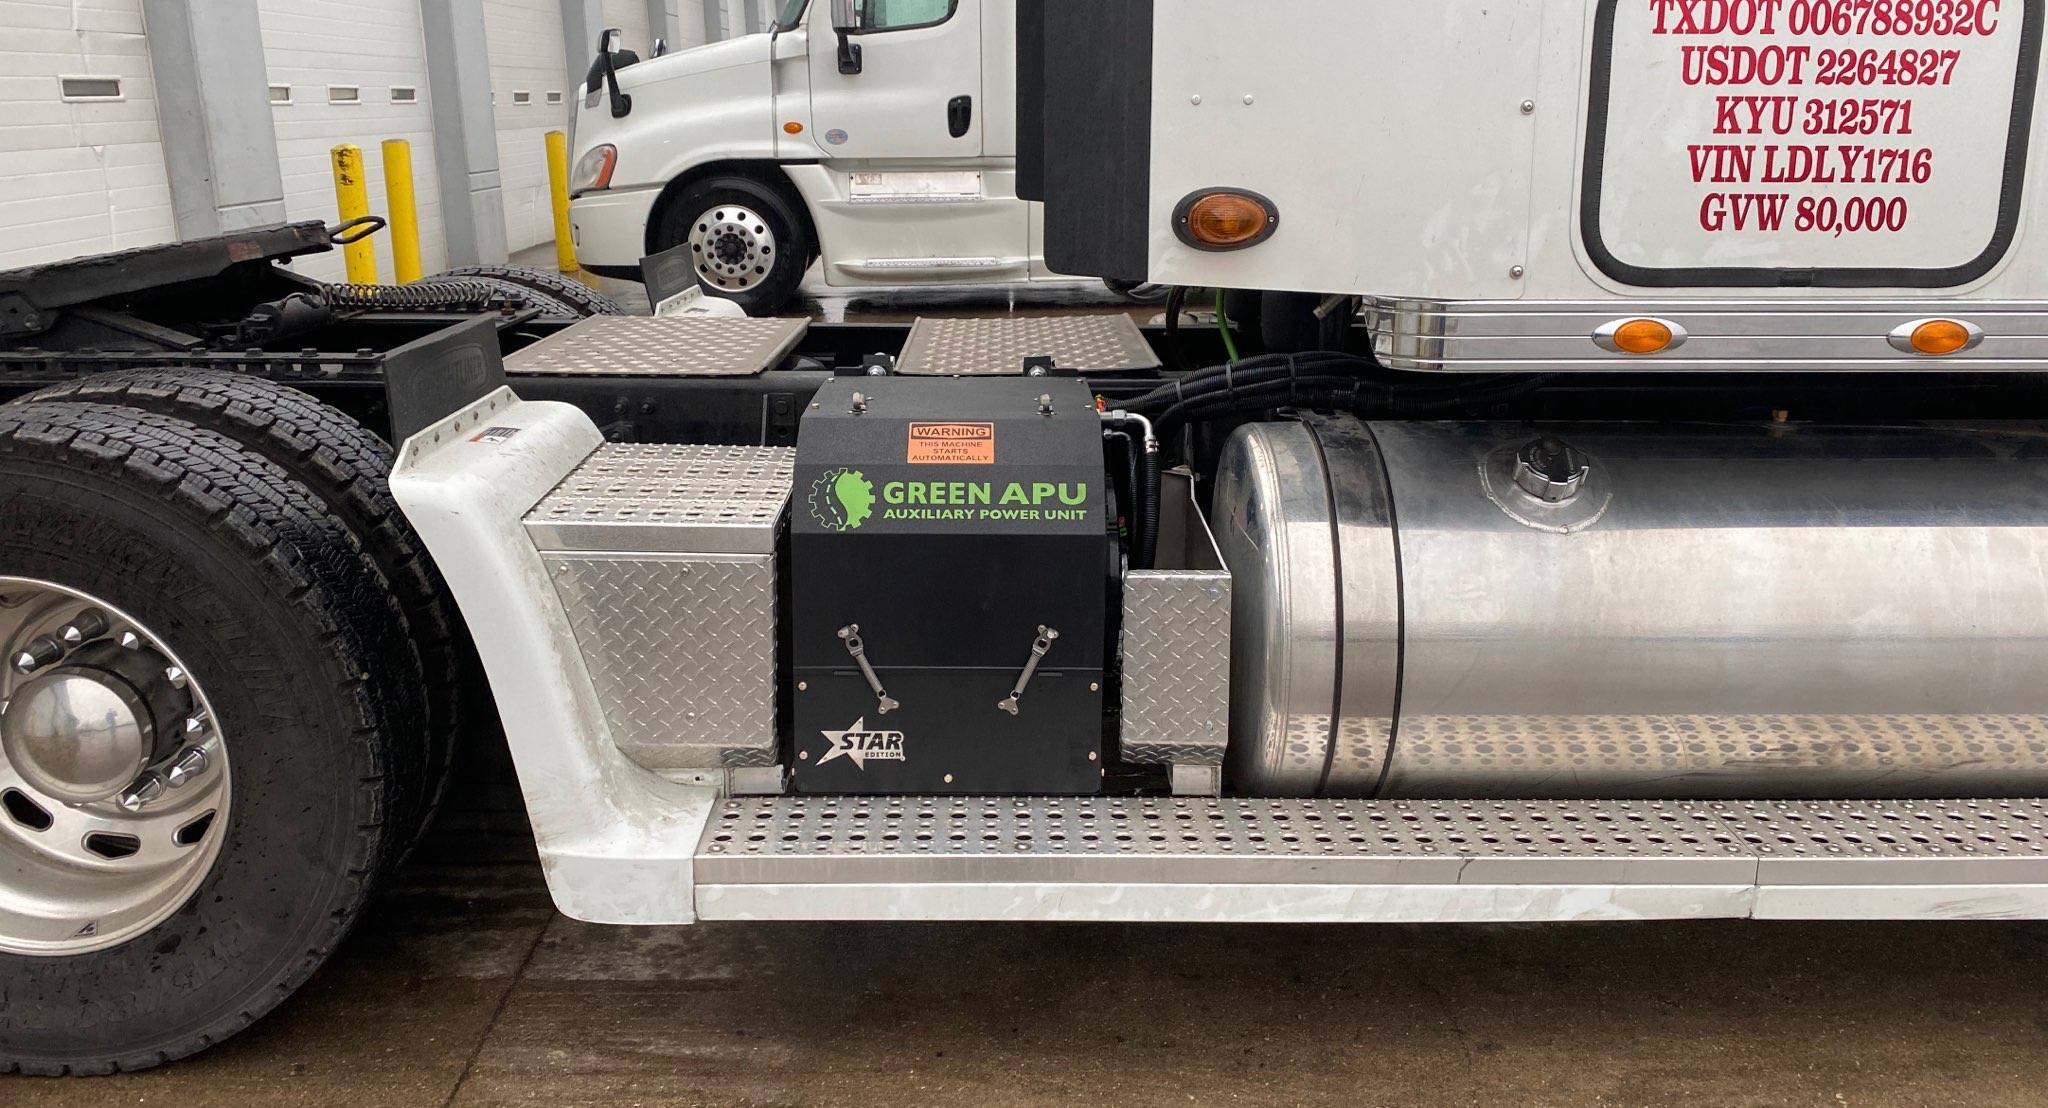 White semi truck with Green APU auxiliary power unit installed